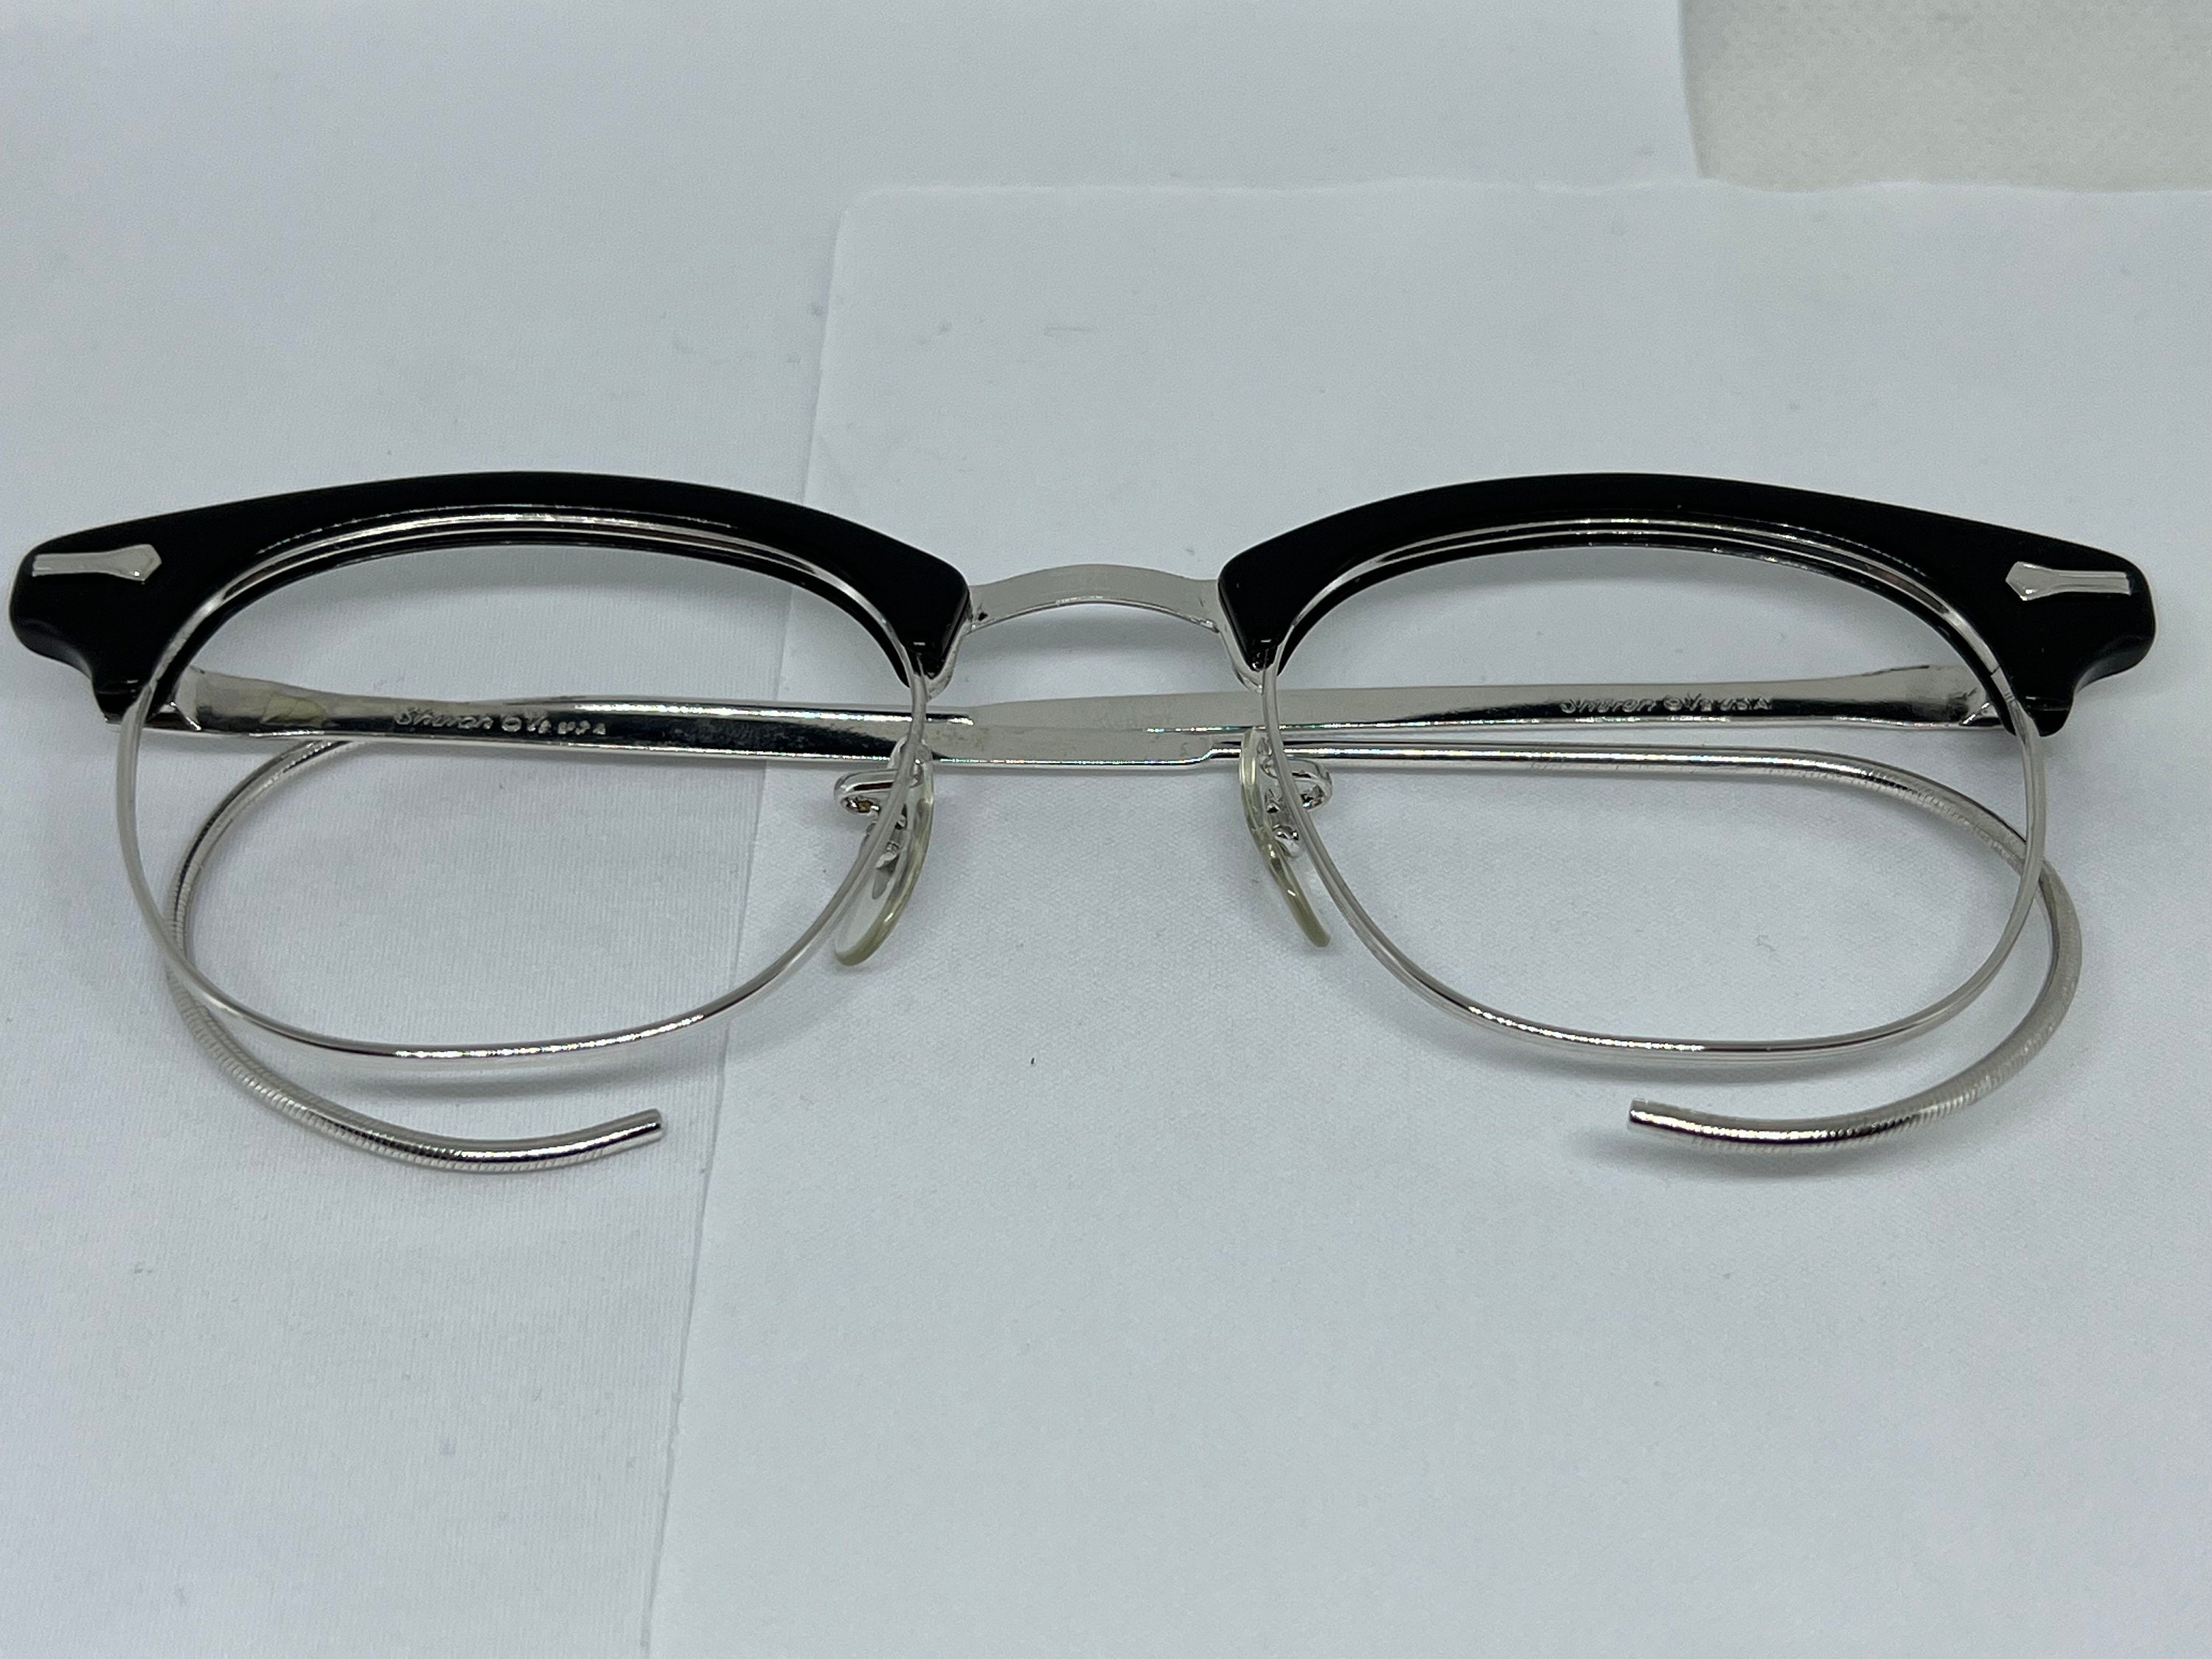 Vintage Shuron Optical Mens Glasses From 1960s. A Piece of History 